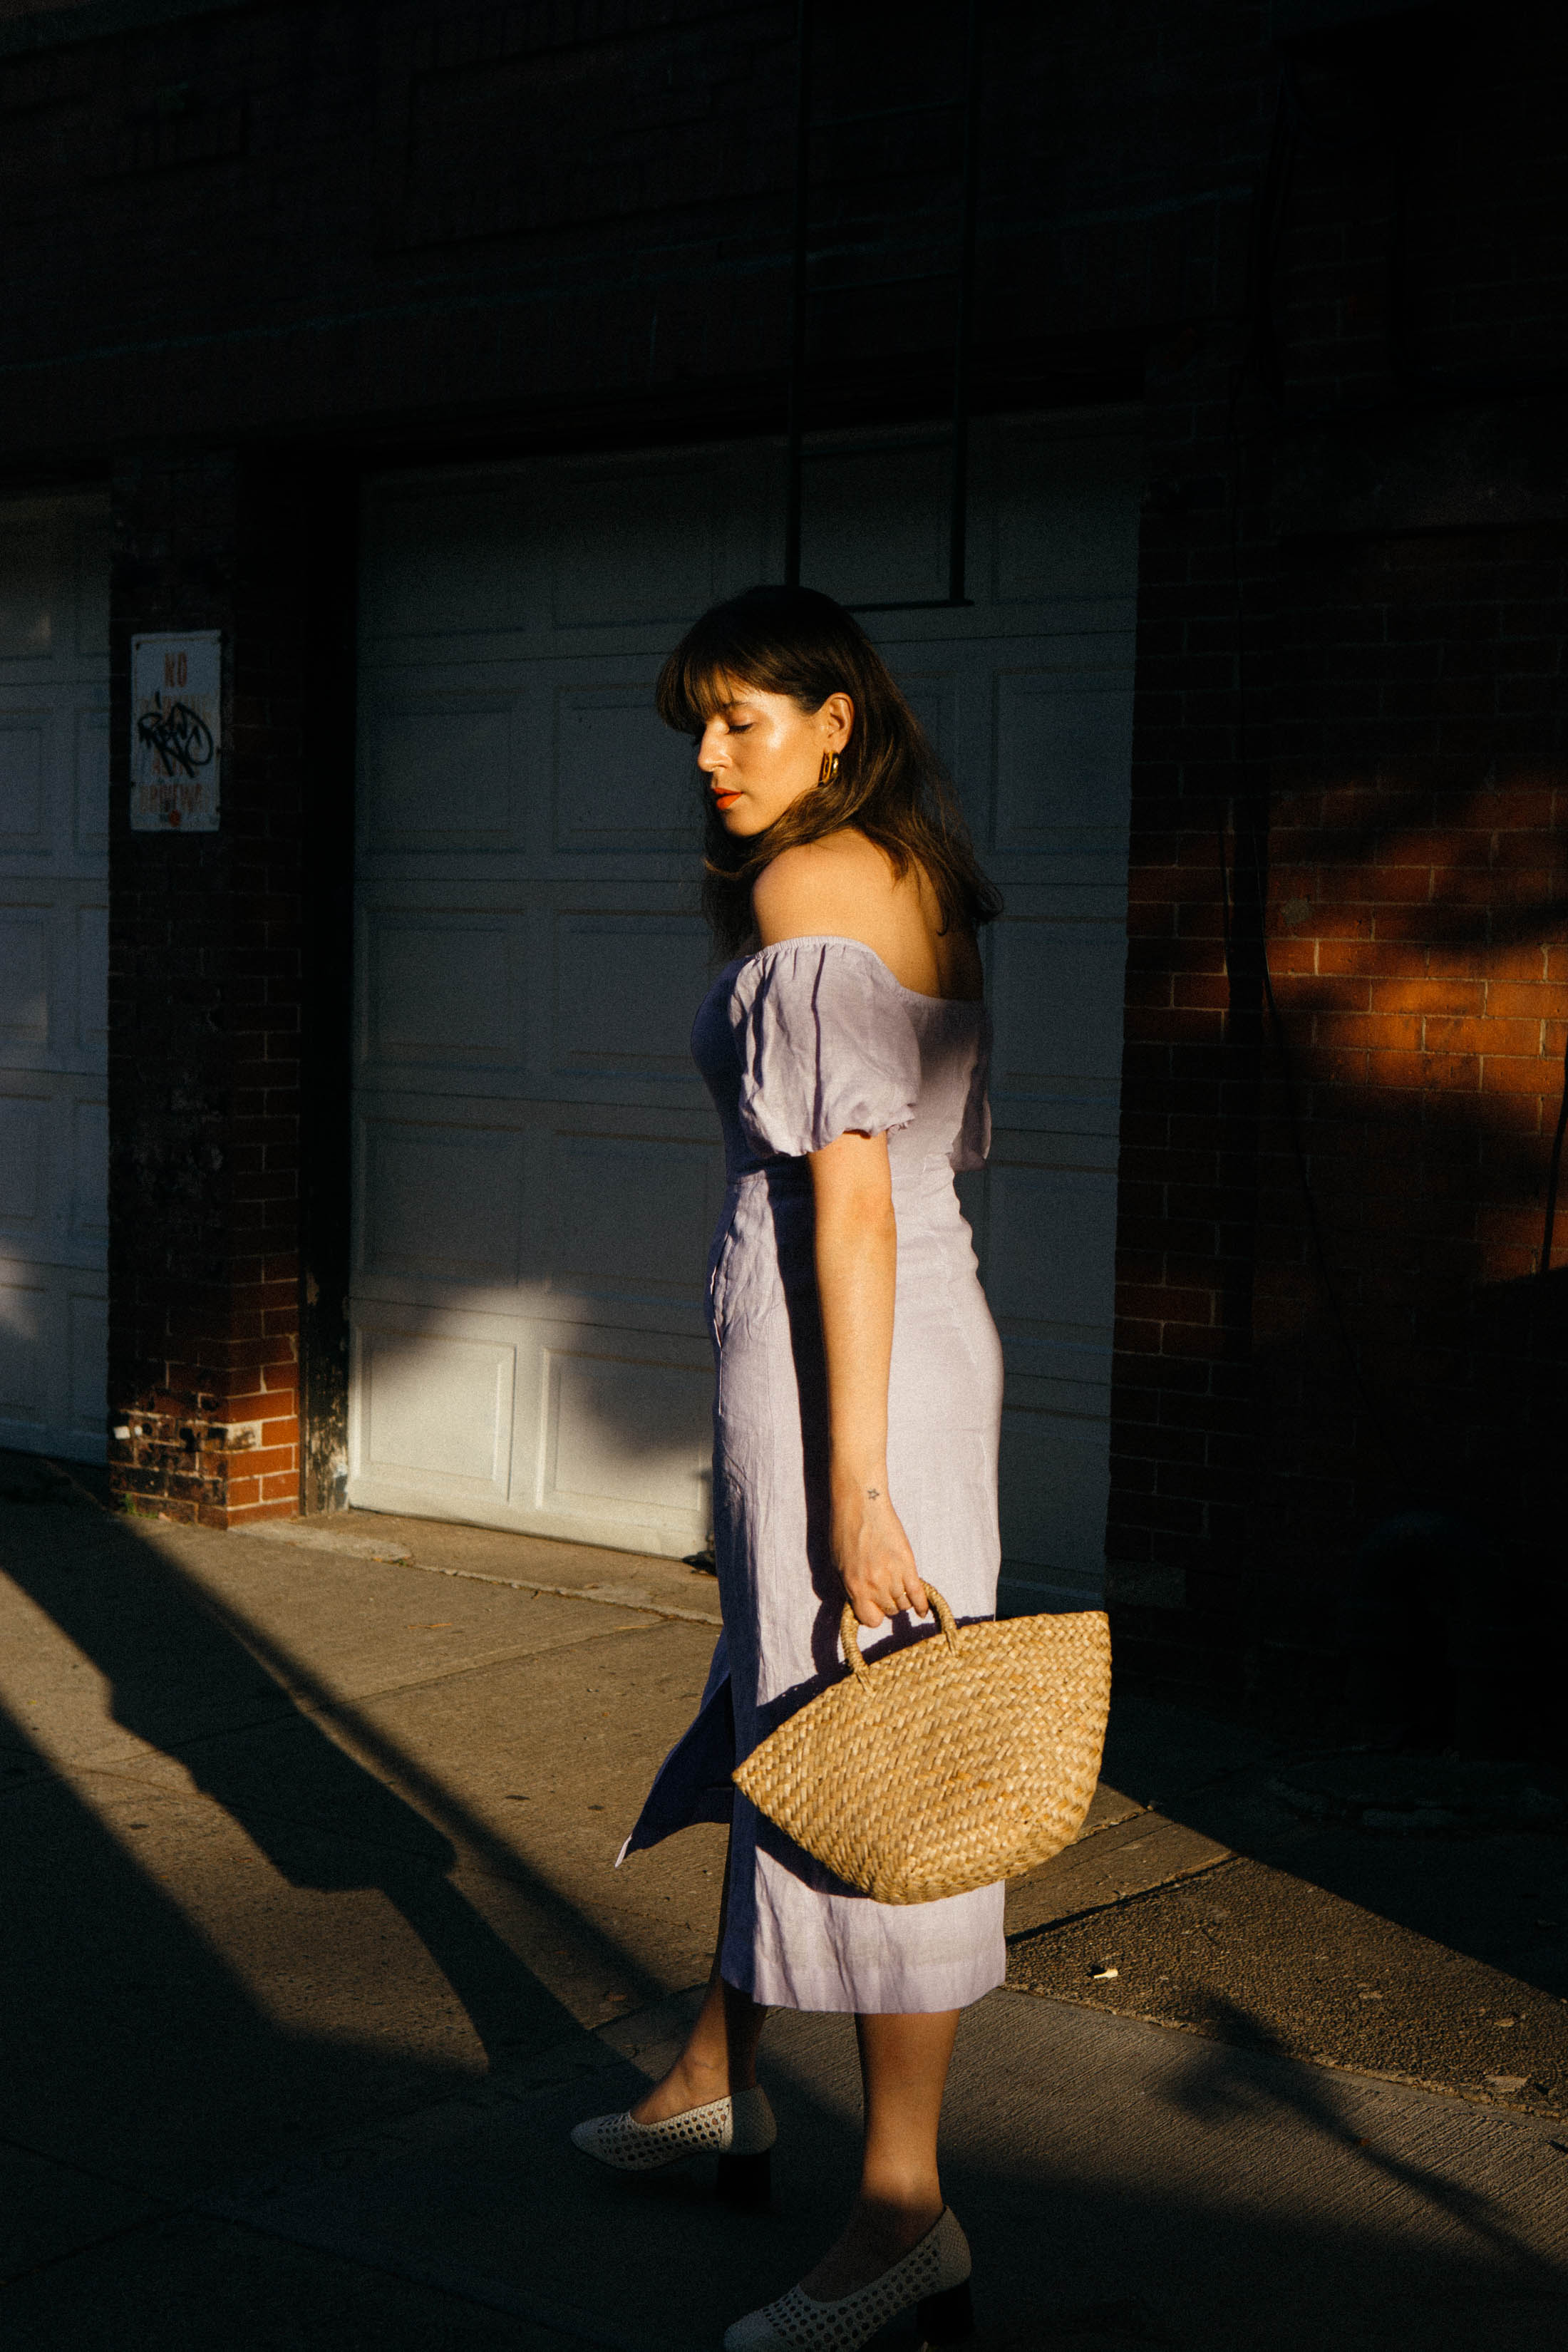 Maristella wears a linen dress with puff sleeves from brit label Kitri Studio